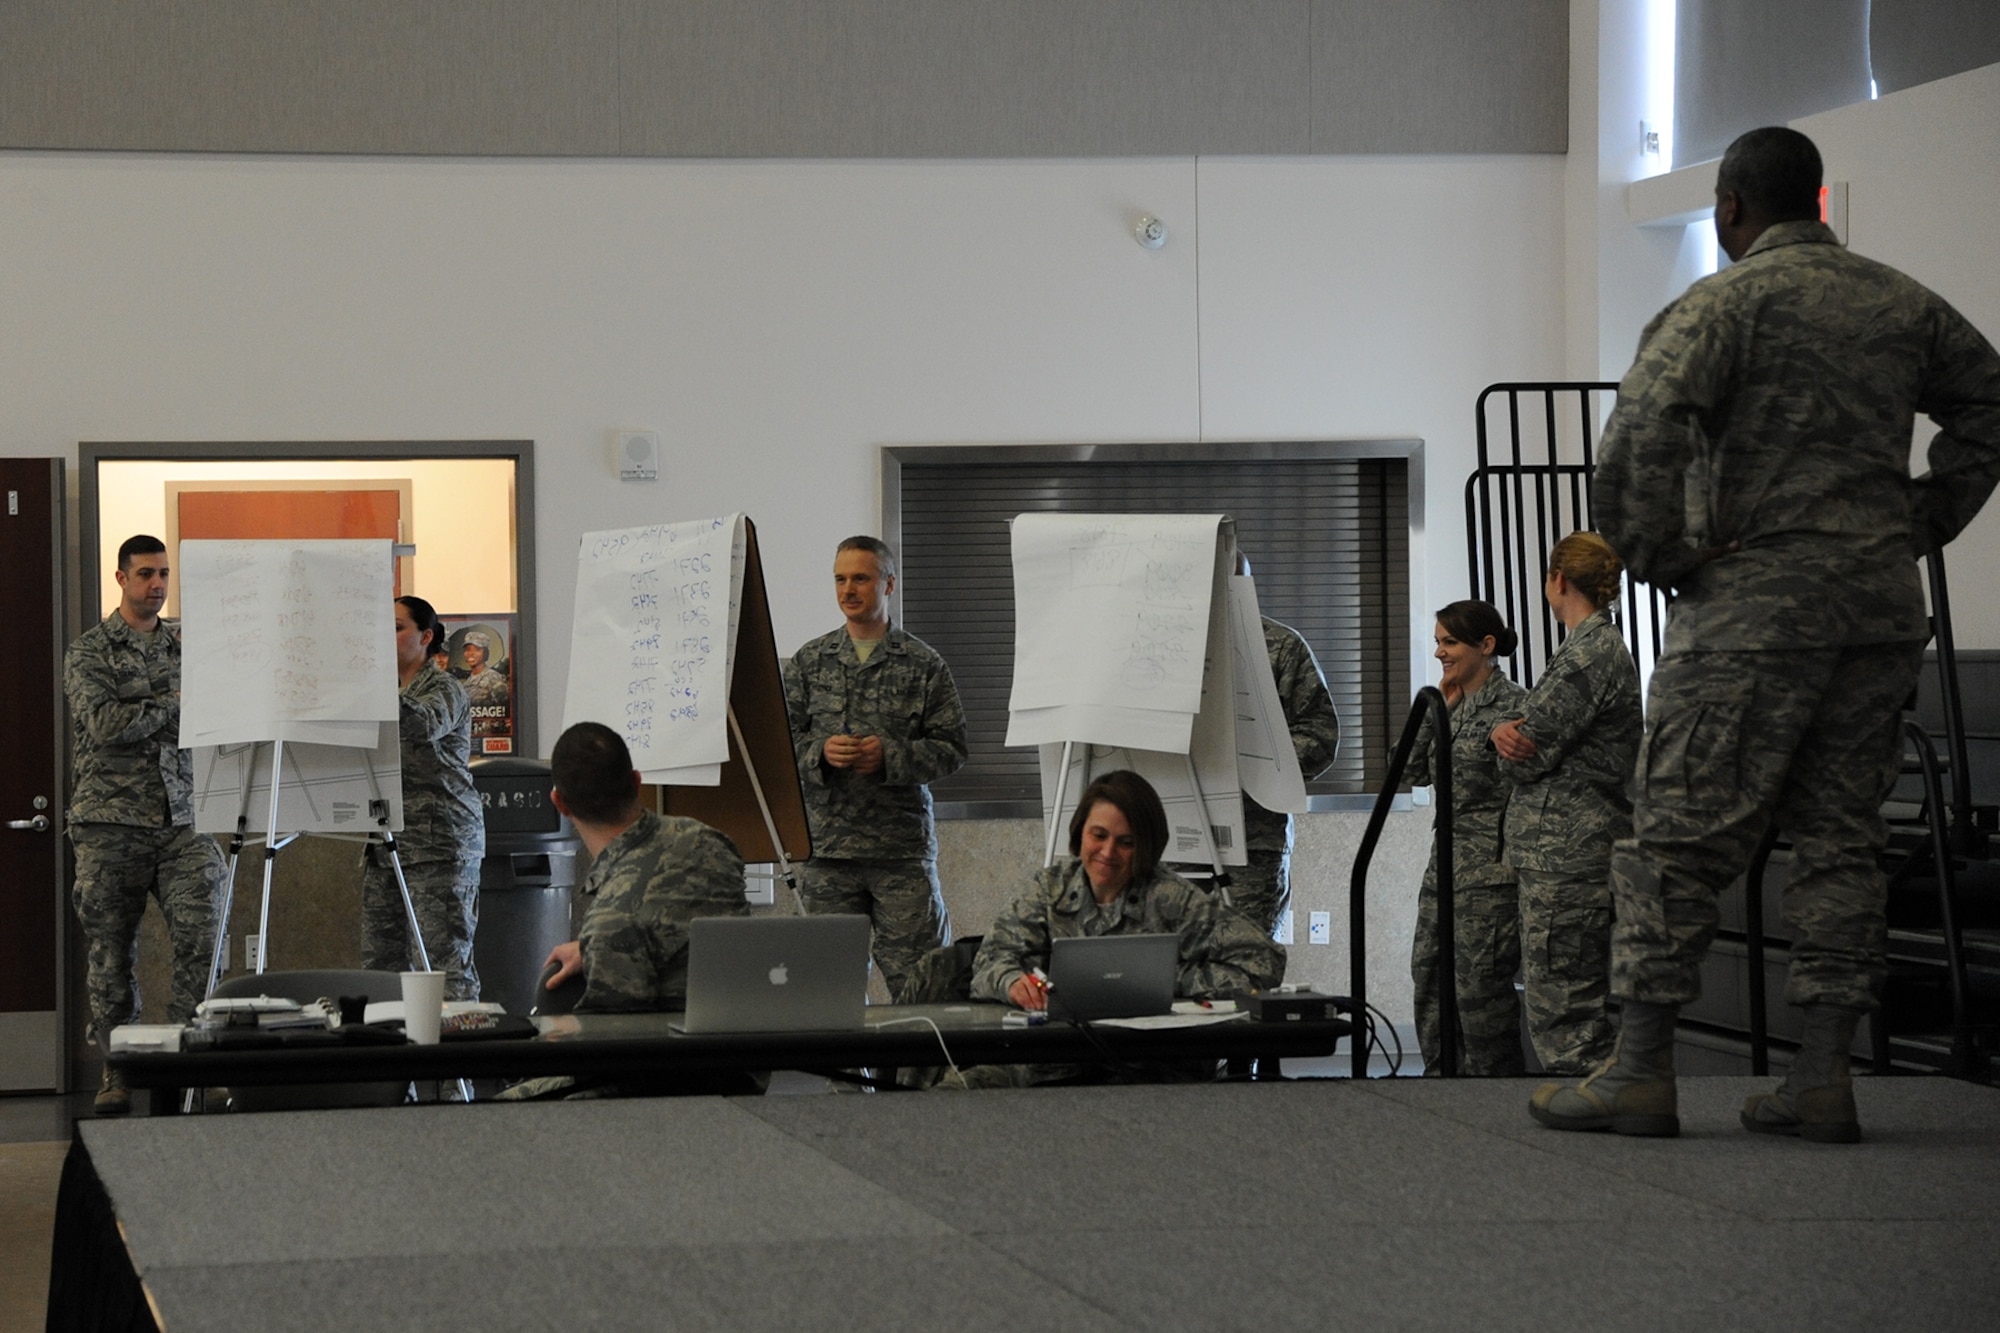 Members of the Air National Guard apply the knowledge they obtained during a two-day Contemporary Base Issues (CBI) course in the final round of Jeopardy held at Camp Withyombe in Clackamas, Oregon, February 19-20, 2016. The CBI course is taught by Air National Guard Judge Advocate Generals and the primary goal is to allow commanders and supervisors to work together as a team to identify, analyze and resolve contemporary problems leaders face. (U.S. Air National Guard photo by Master Sgt. Shelly Davison, 142nd Fighter Wing Public Affairs)